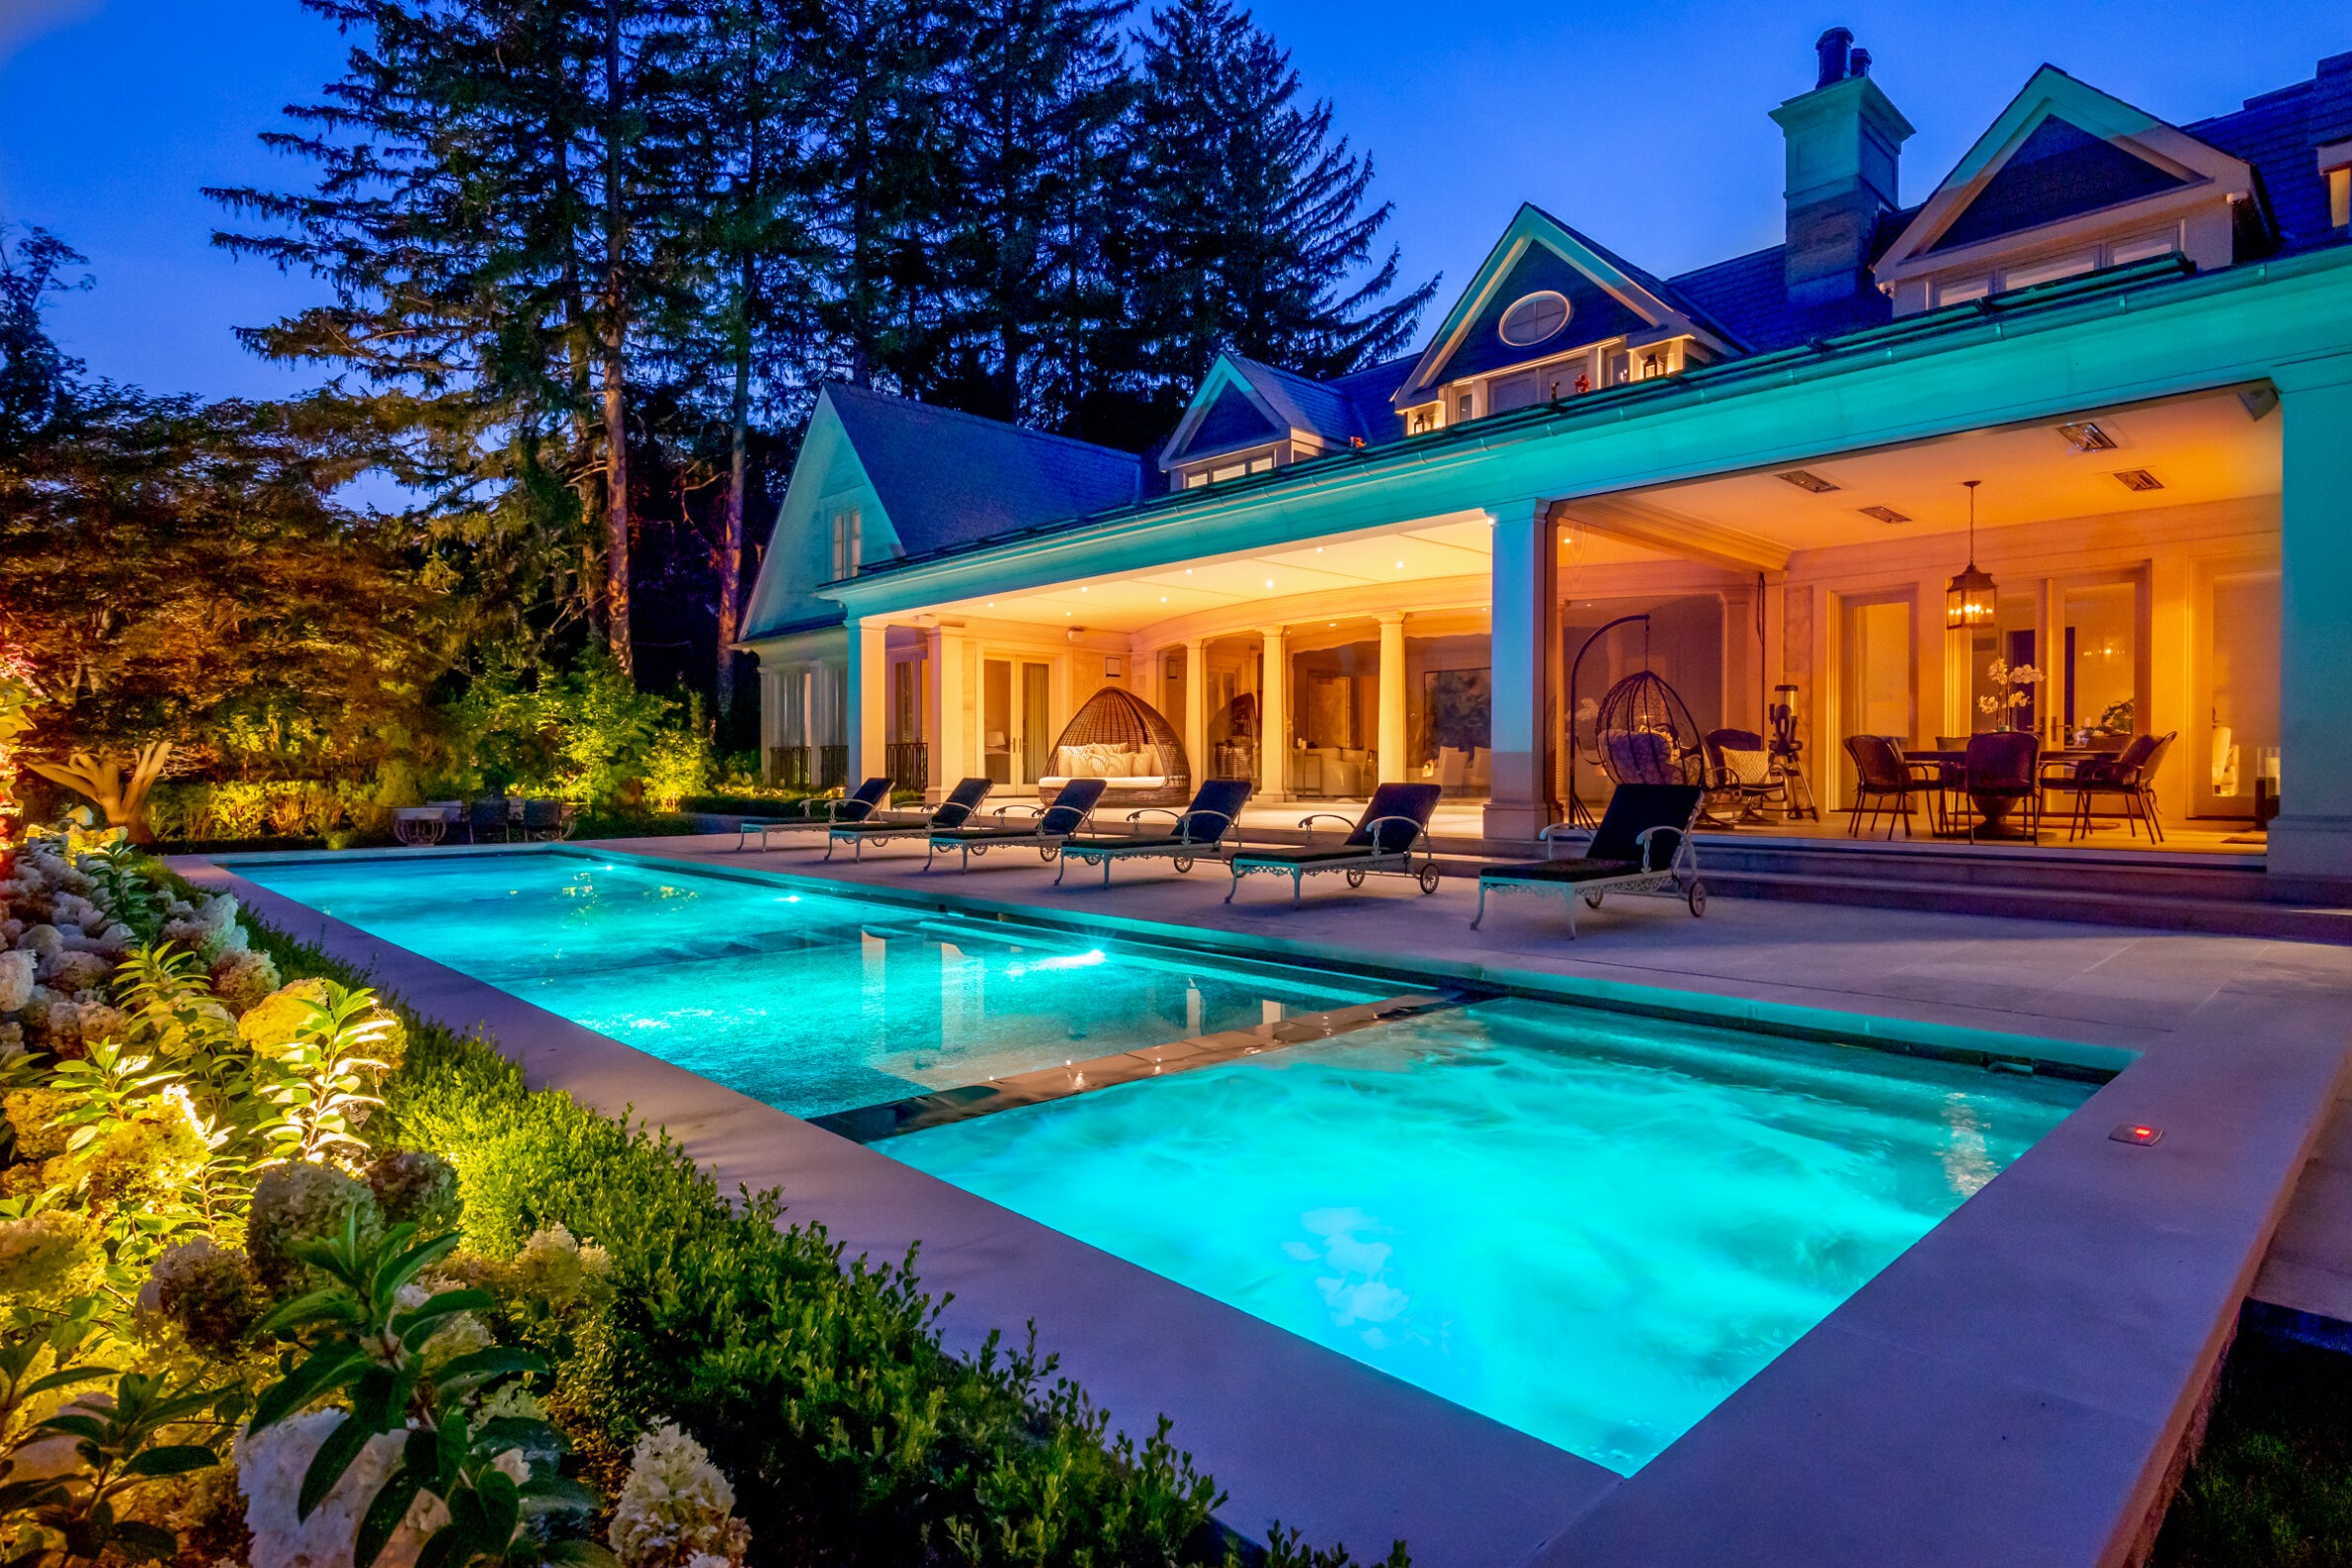 A luxurious house at twilight with a lit swimming pool, surrounded by landscaping, loungers, and an illuminated patio area. Tranquil and upscale ambiance.